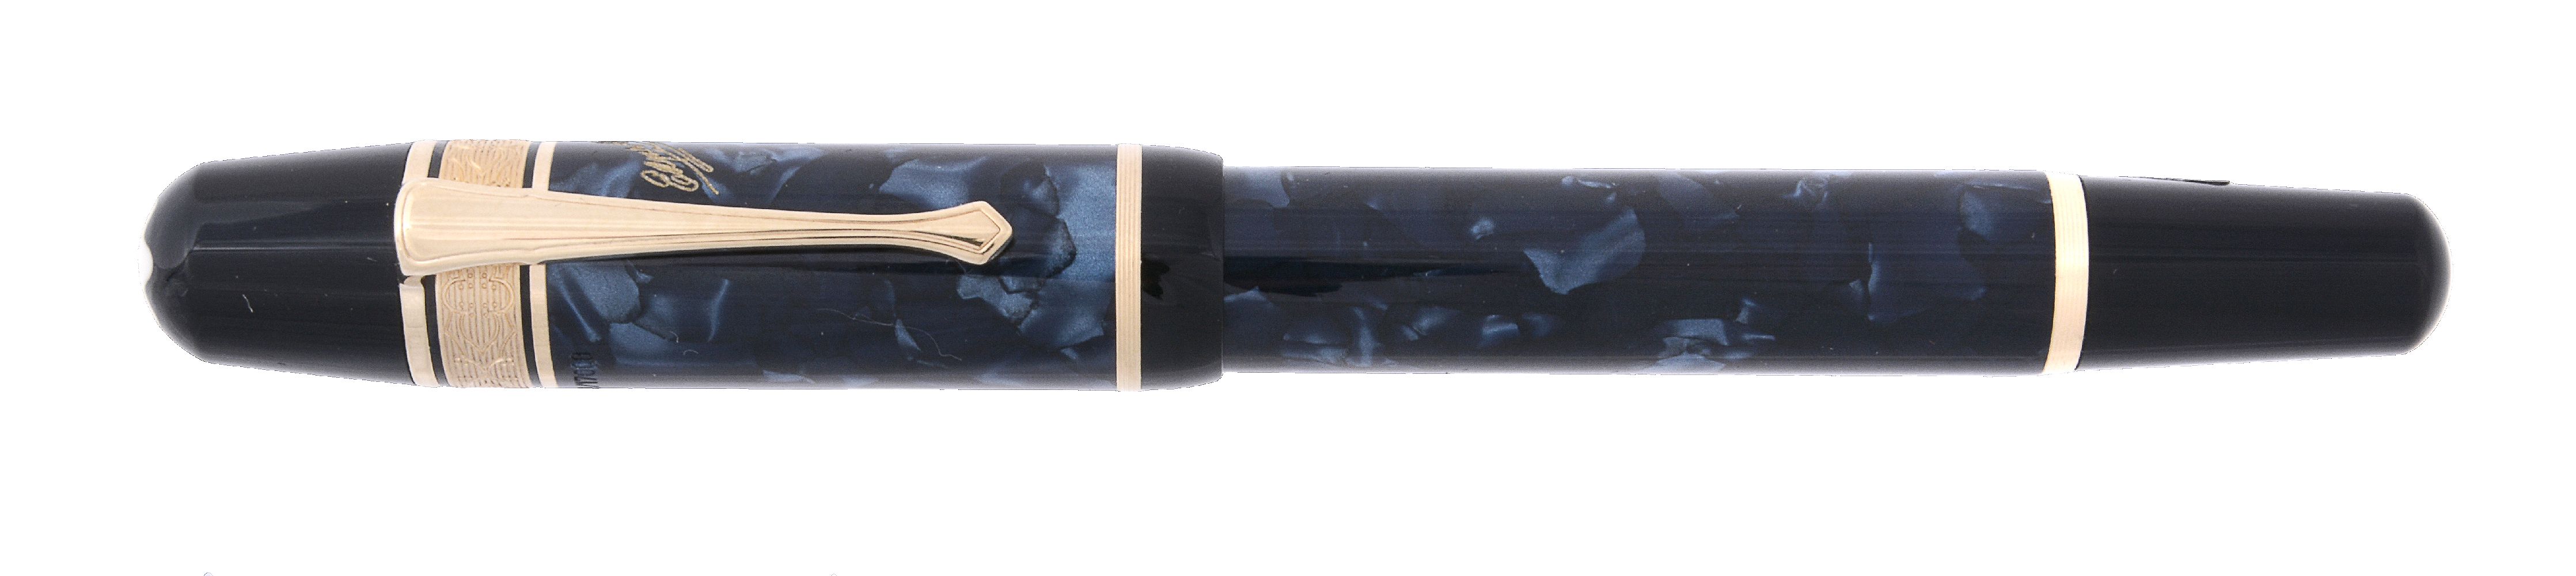 Montblanc, Writers Edition, Edgar Allen Poe, a limited edition fountain pen